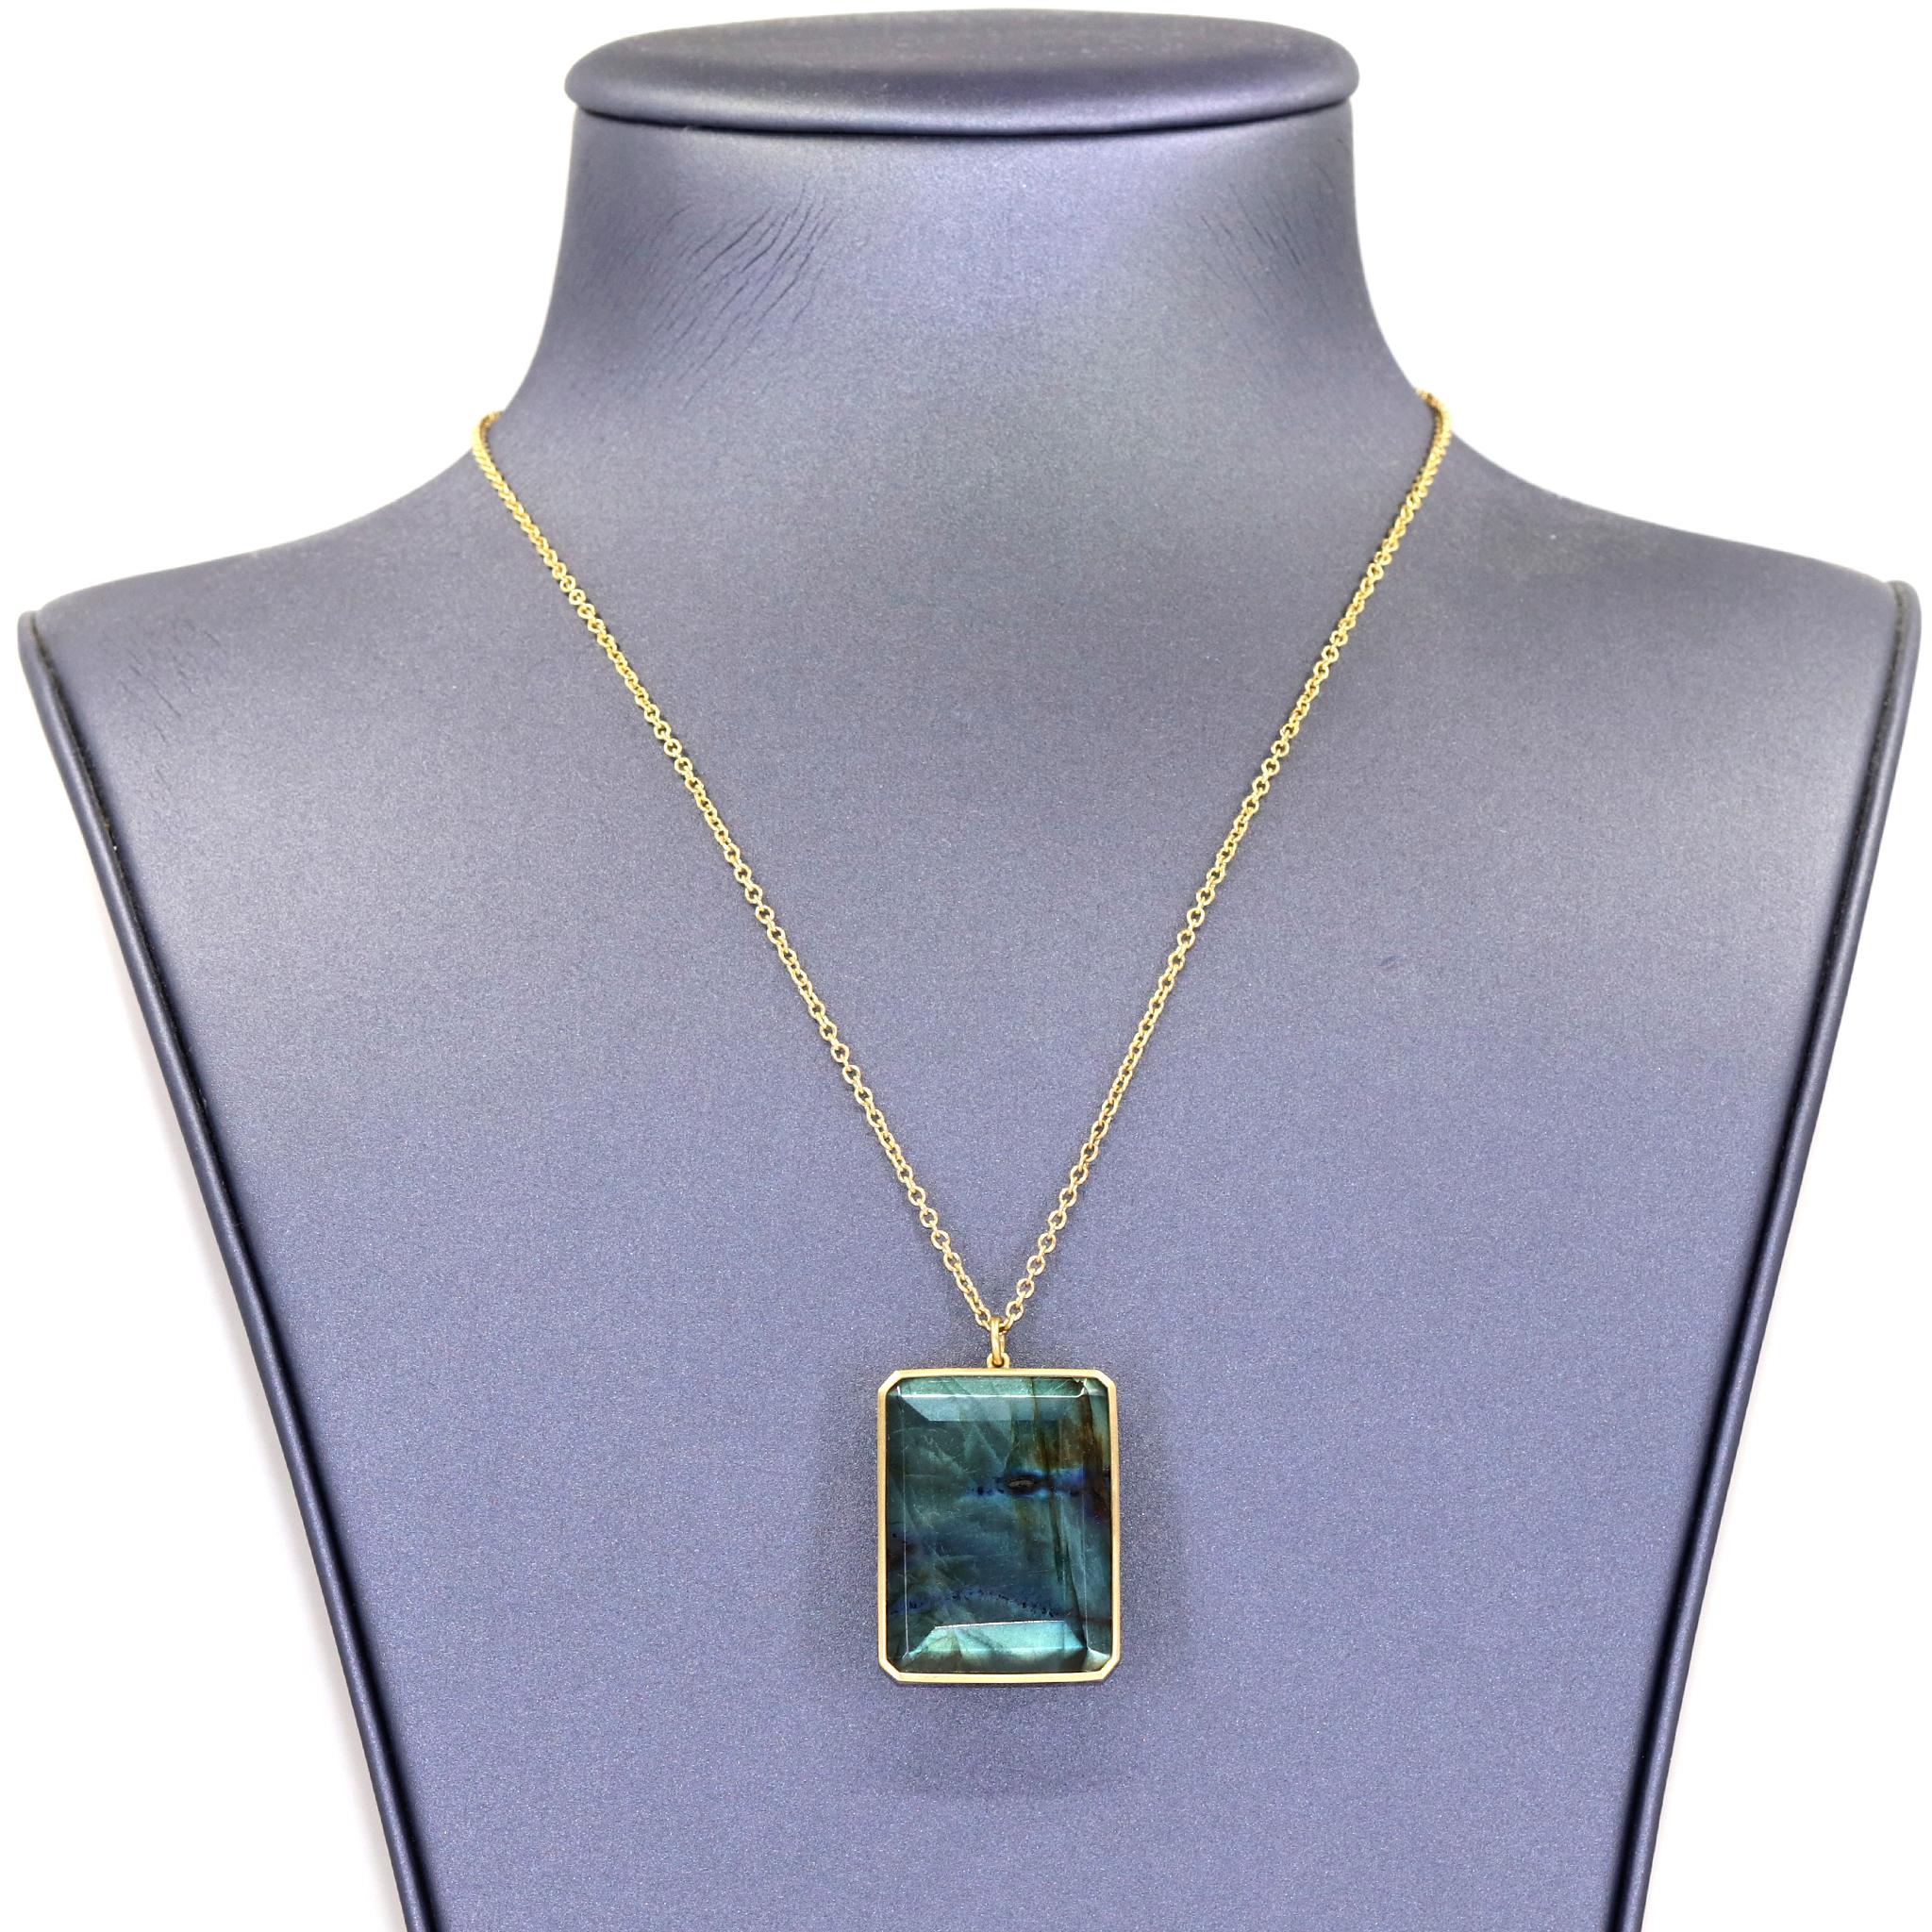 One of a Kind Necklace by jewelry maker Lola Brooks hand-fabricated in matte-finished 18k yellow gold featuring a gorgeous faceted labradorite (43.39tcw) octagon with sensational color play, bezel-set and finished on an 18k yellow gold chain.